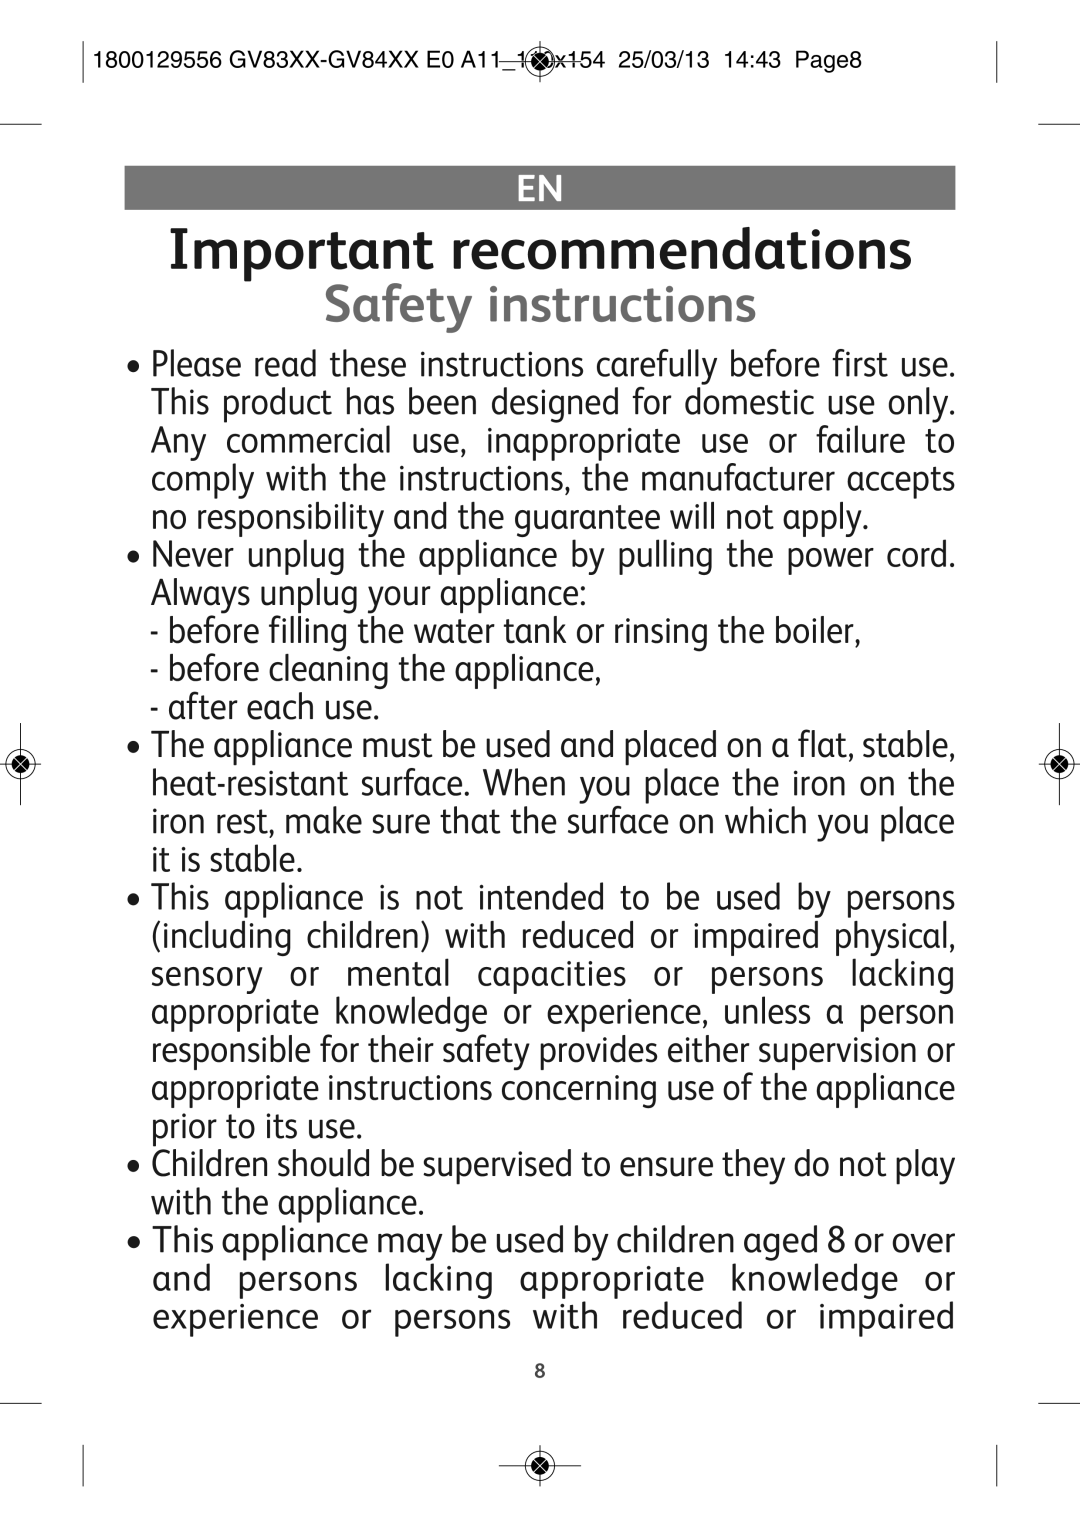 Tefal GV8431C0, GV8431S0, GV8431G0, GV8431CH, GV8431E0 manual Important recommendations, Safety instructions 